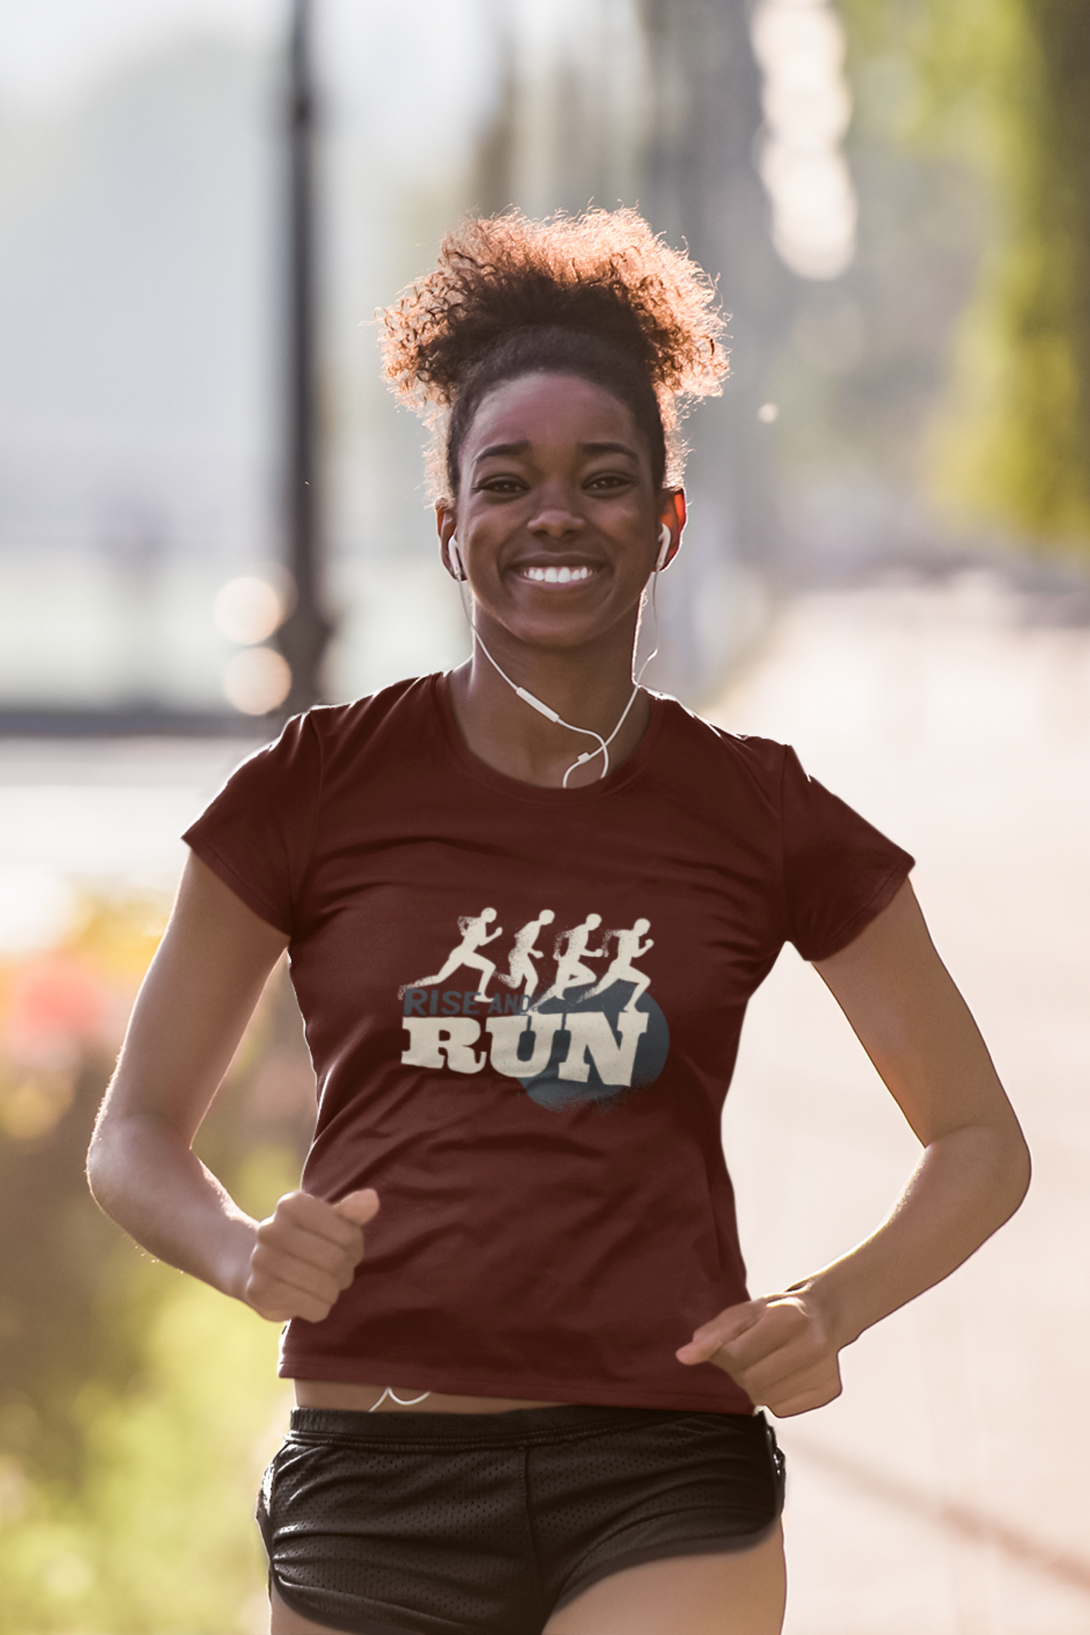 Rise And Run Printed T-Shirt For Women - WowWaves - 5